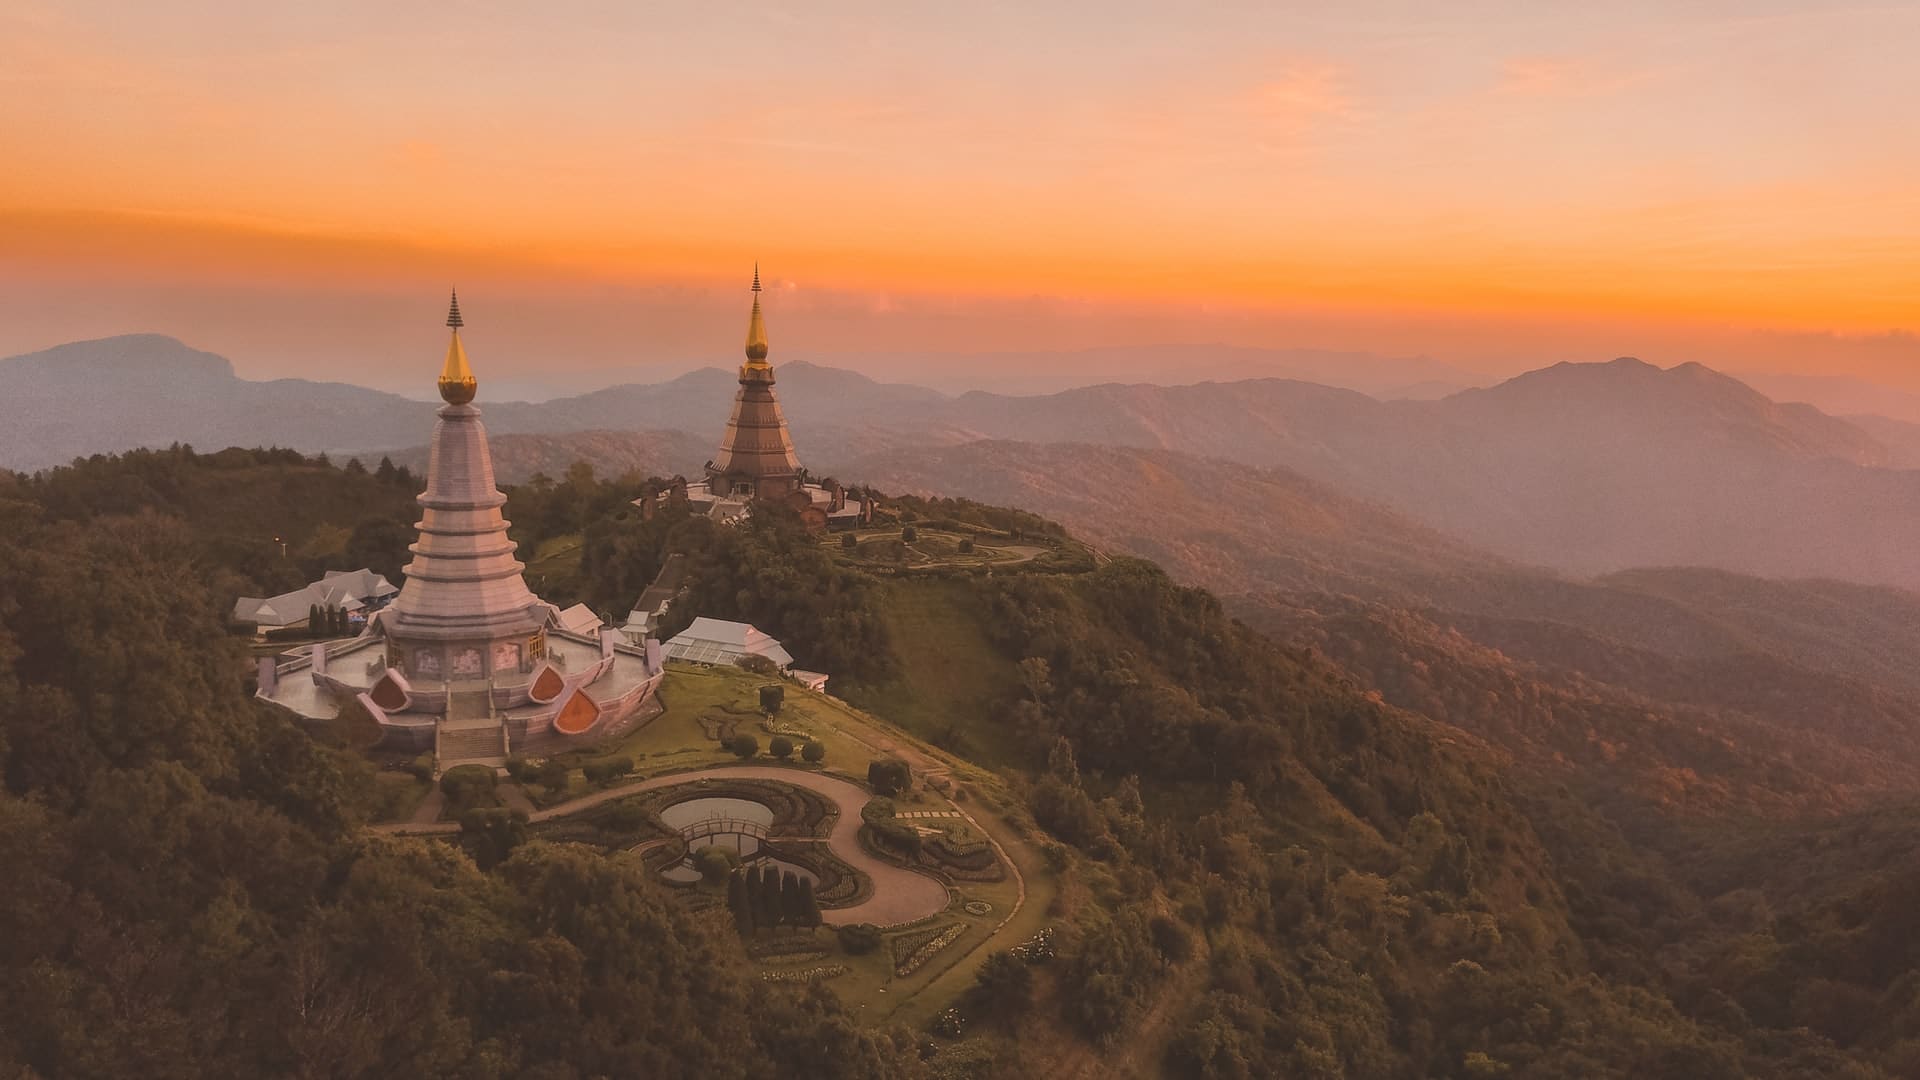 Hilltop view with a golden pagoda. View from Doi Inthanon during the sunrise